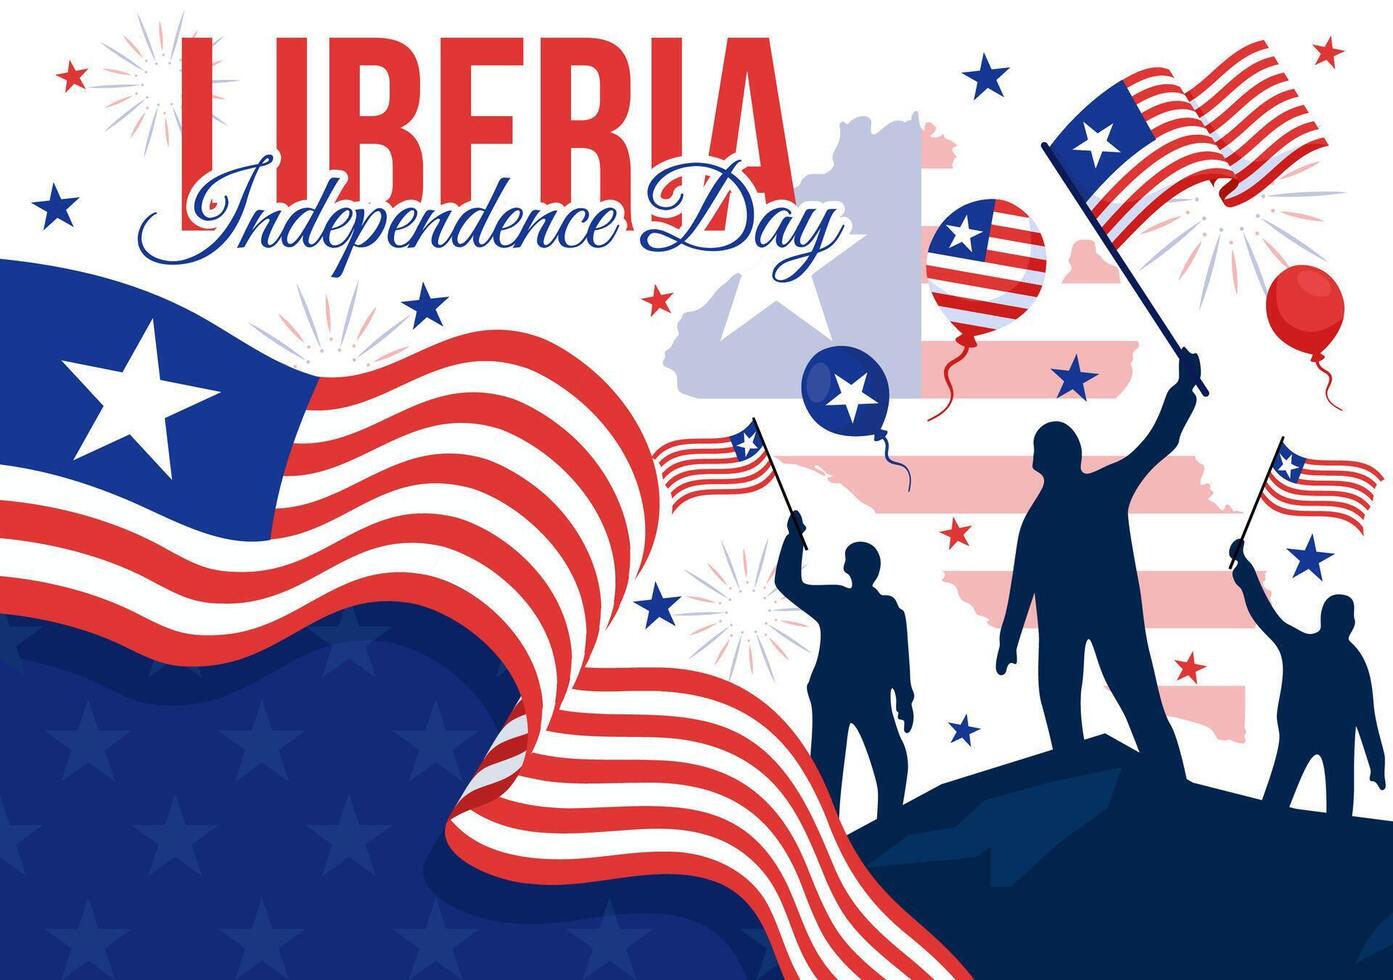 Happy Liberia Independence Day Illustration on July 26 with Waving flag and Ribbon in National Holiday Flat Cartoon Background Design vector